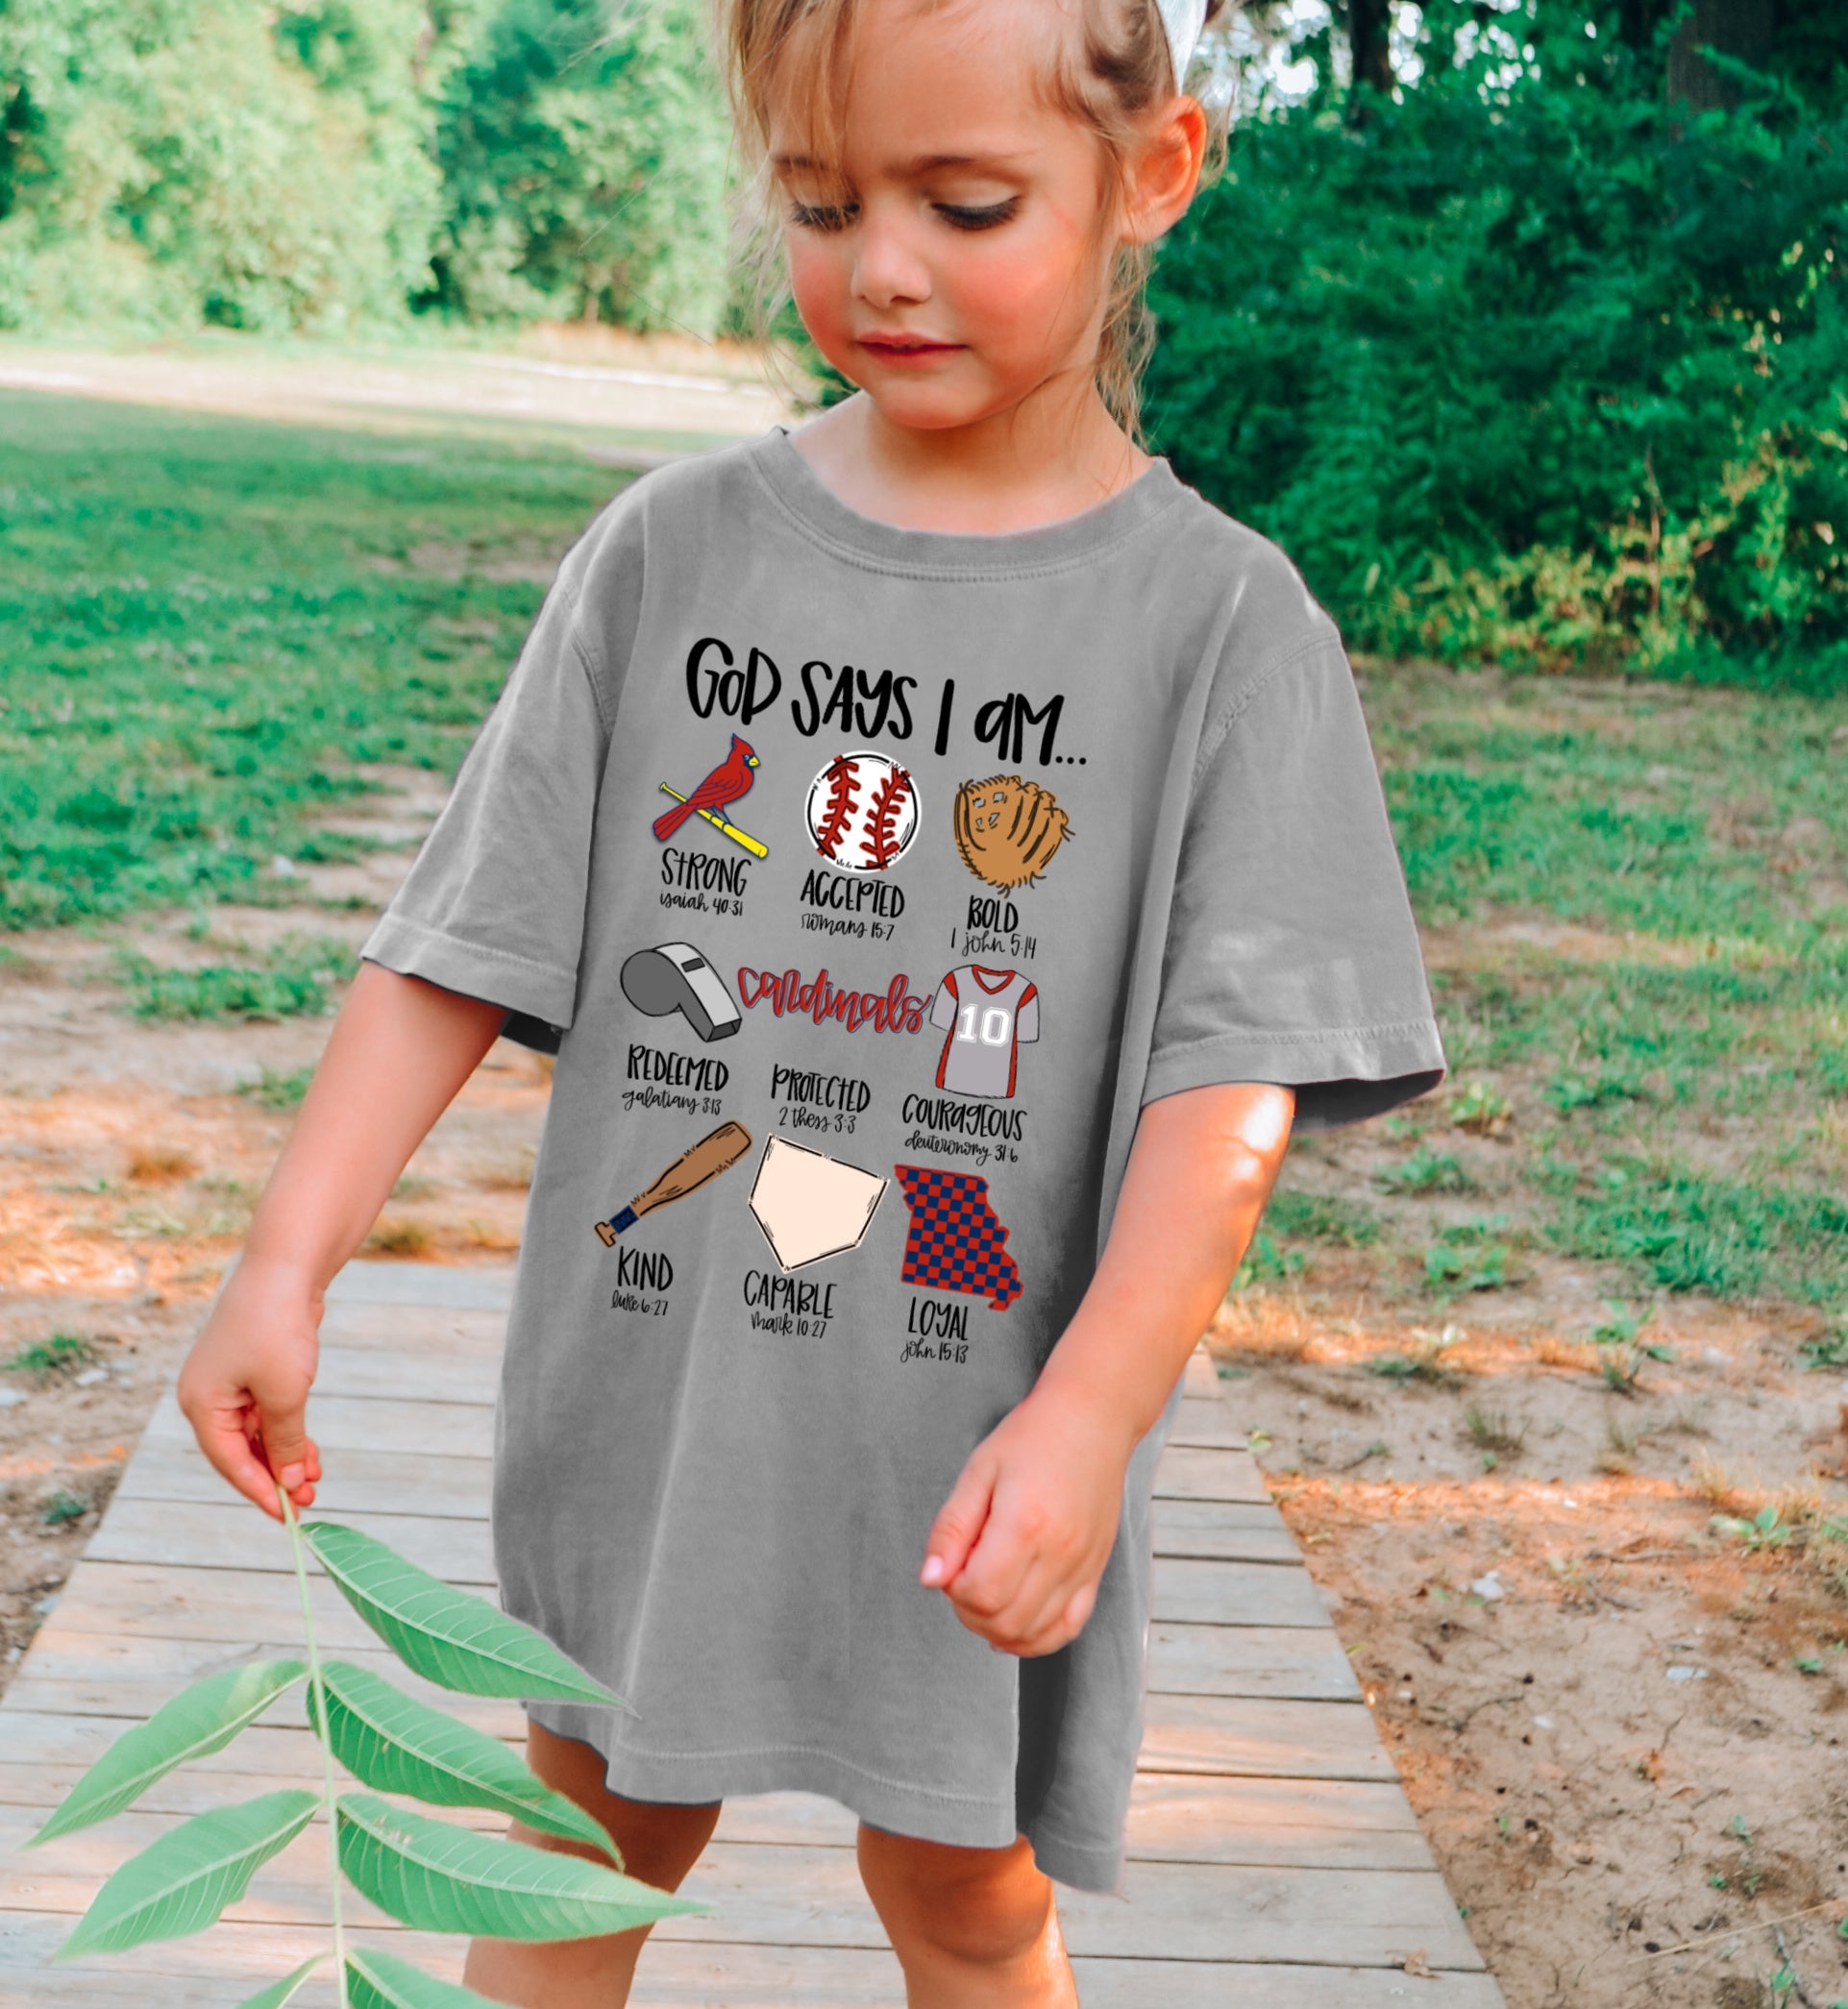 Pink Mustache Boutique Comfort Colors God Says I Am Cardinals - Baseball Tee/ Youth and Adult Sizes Adult M